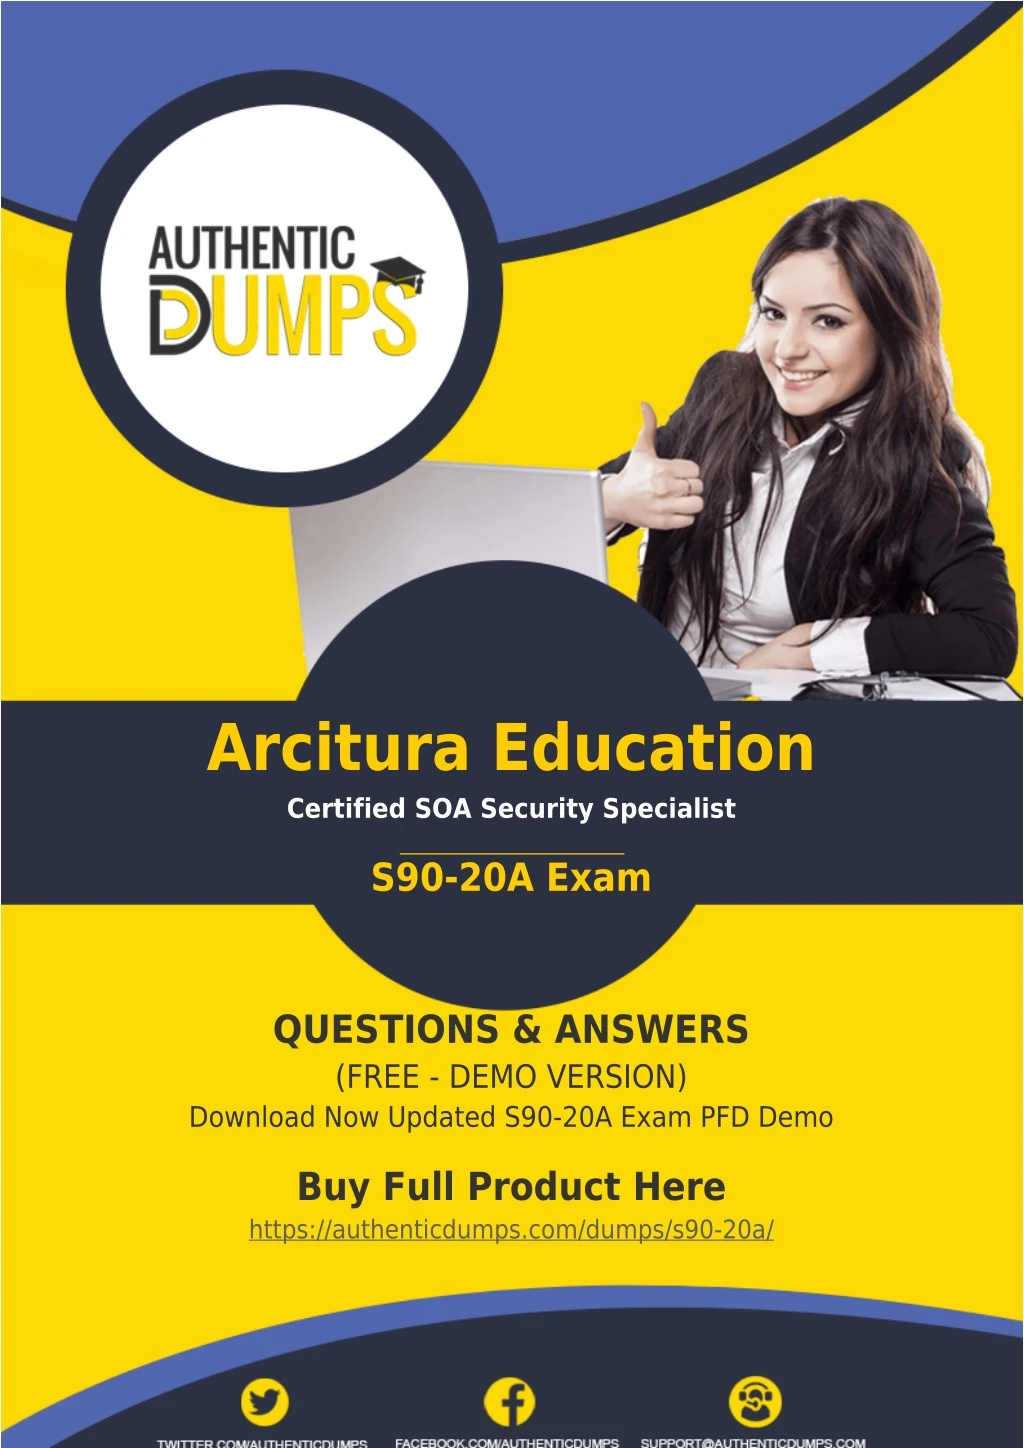 arcitura education certified soa security